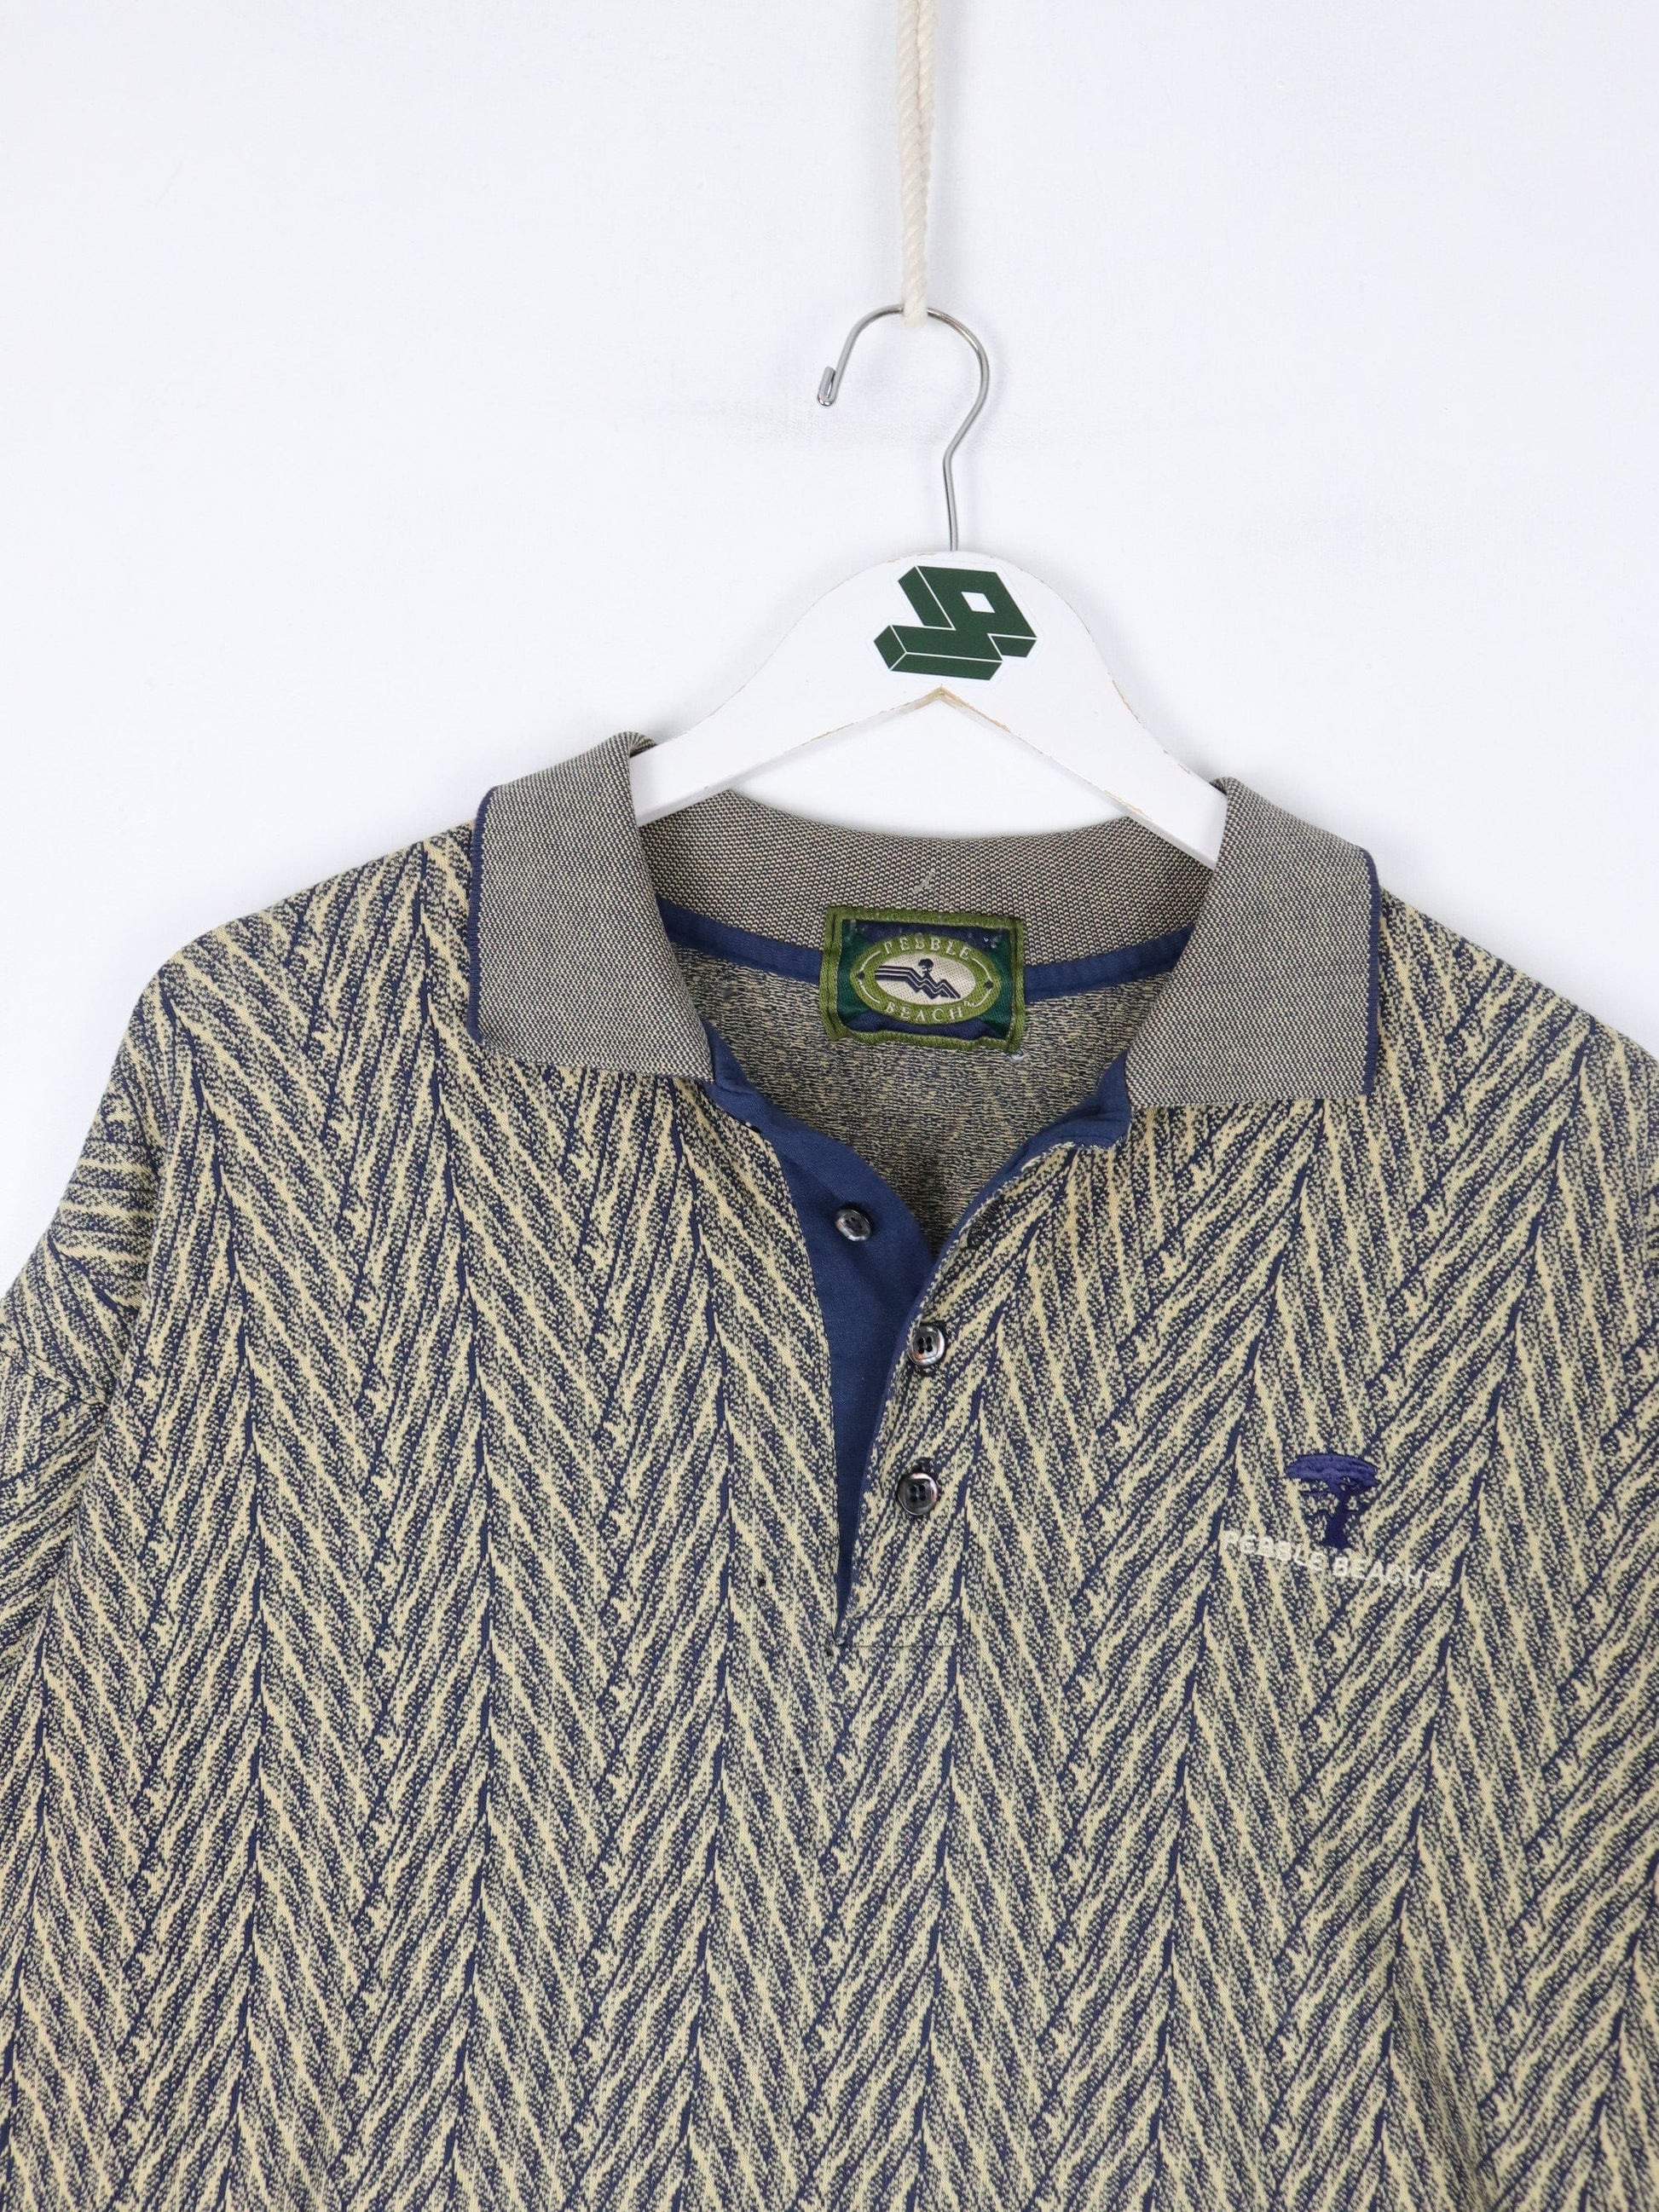 Other Button Up Shirts Vintage Pebble Beach Polo Shirt Mens 2XL Beige Blue Golf Pattern